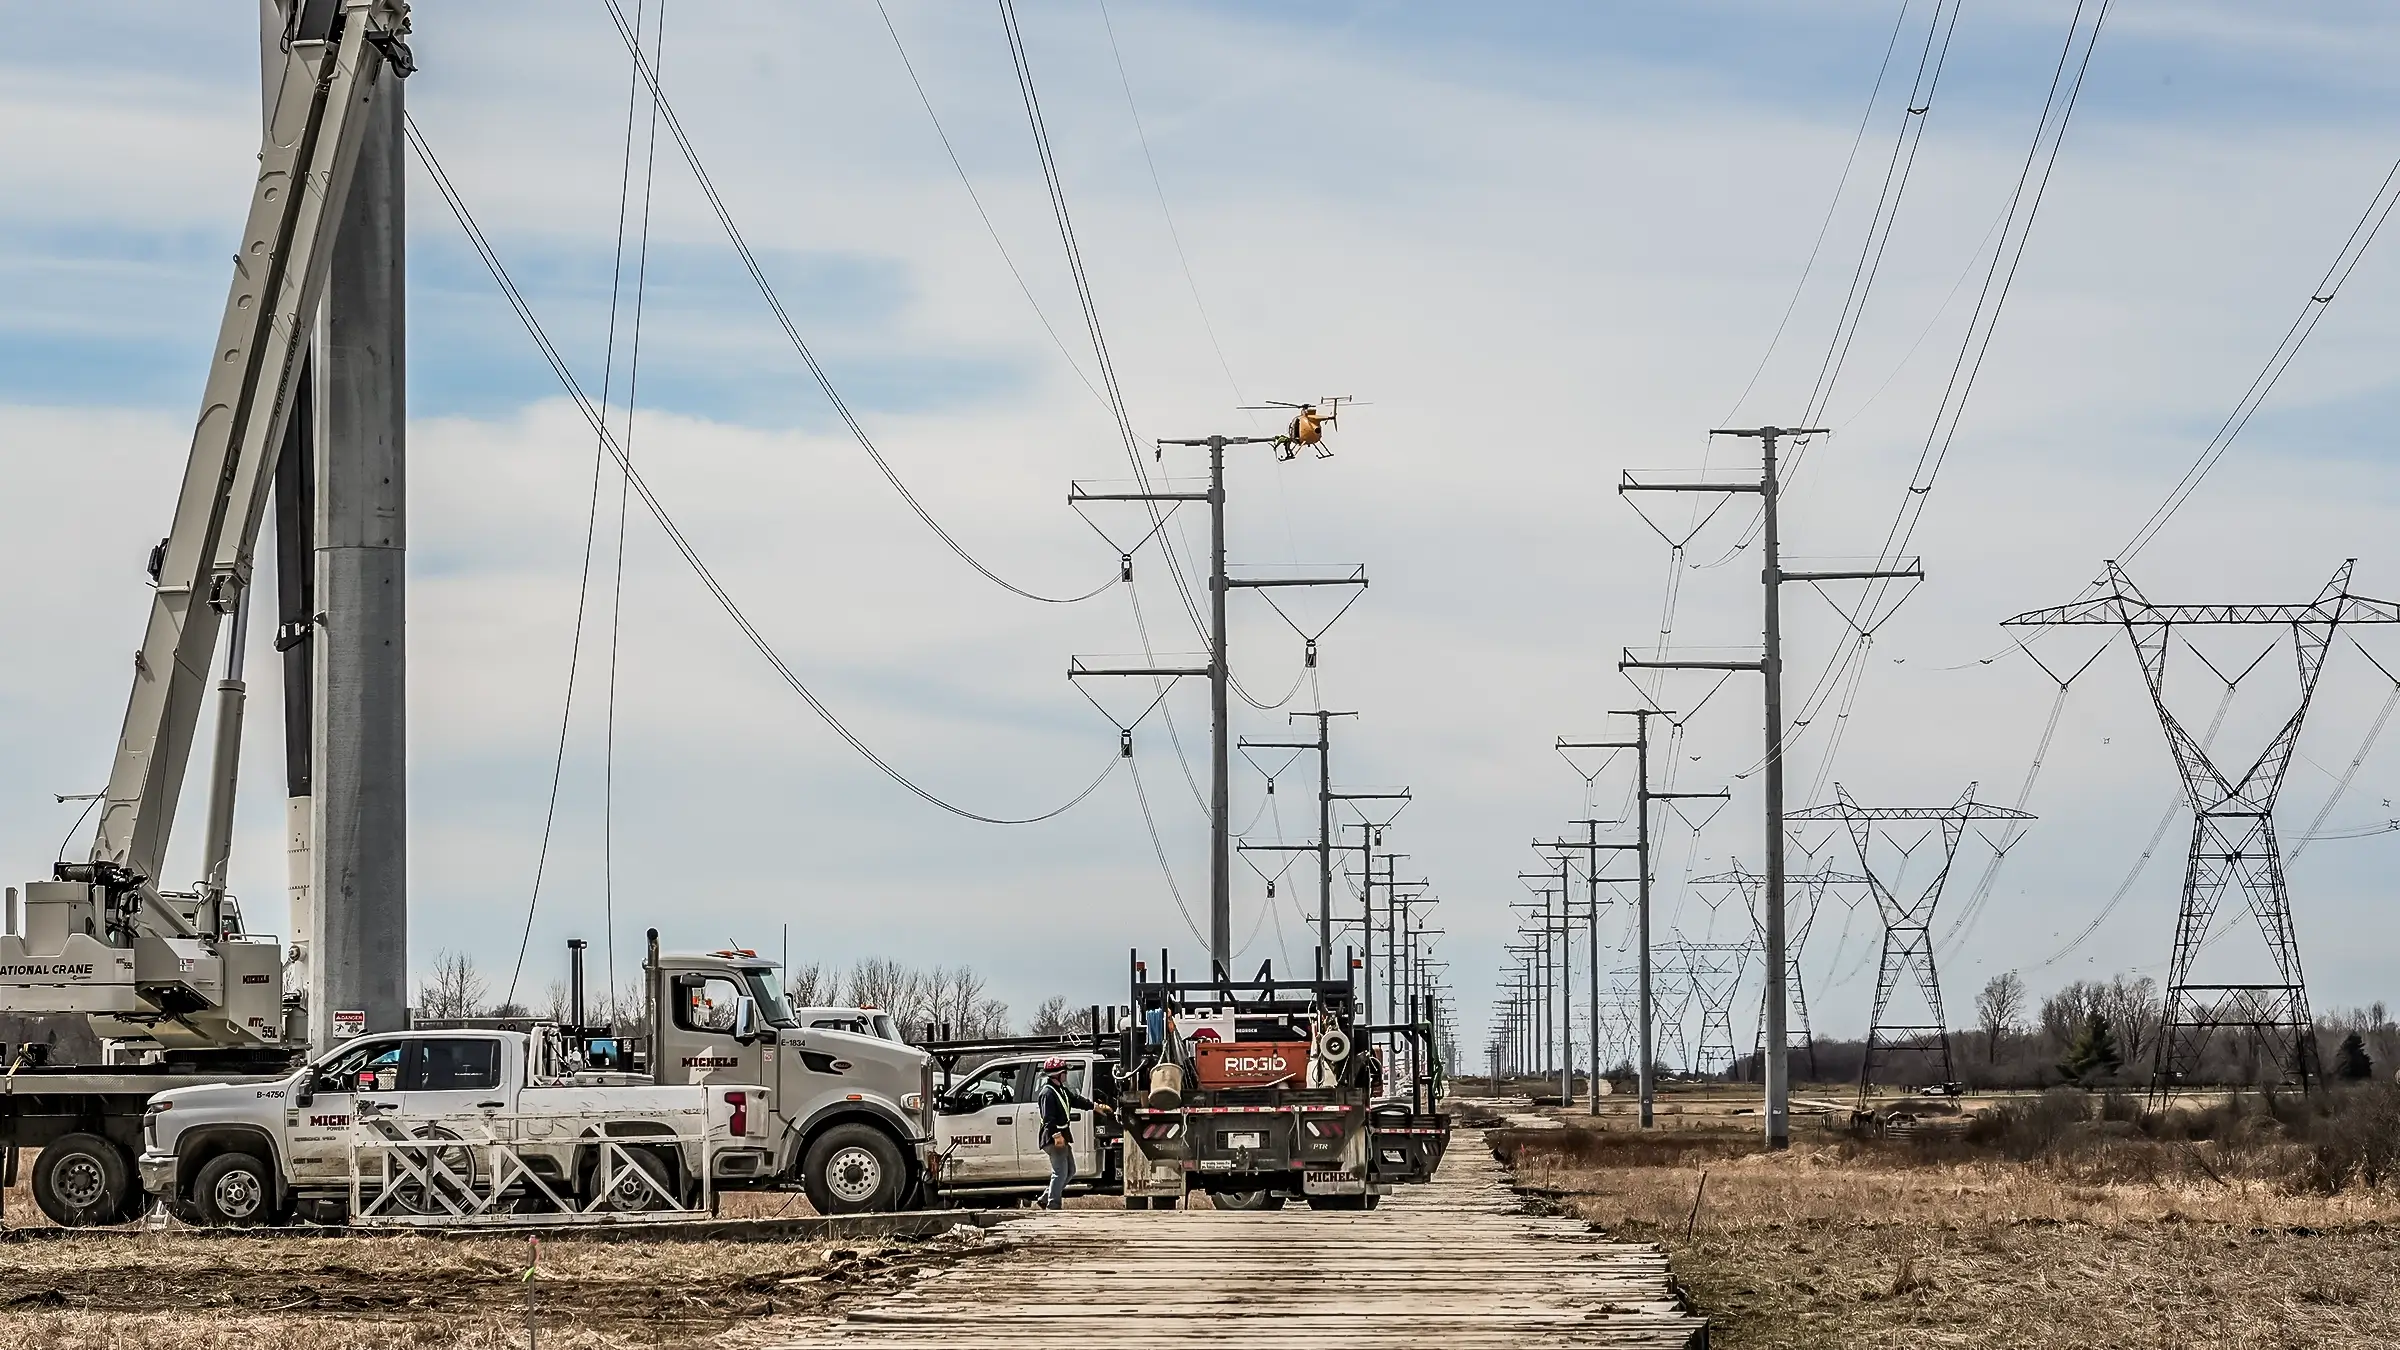 A crane and helicopter operate on large power poles in rural New York.